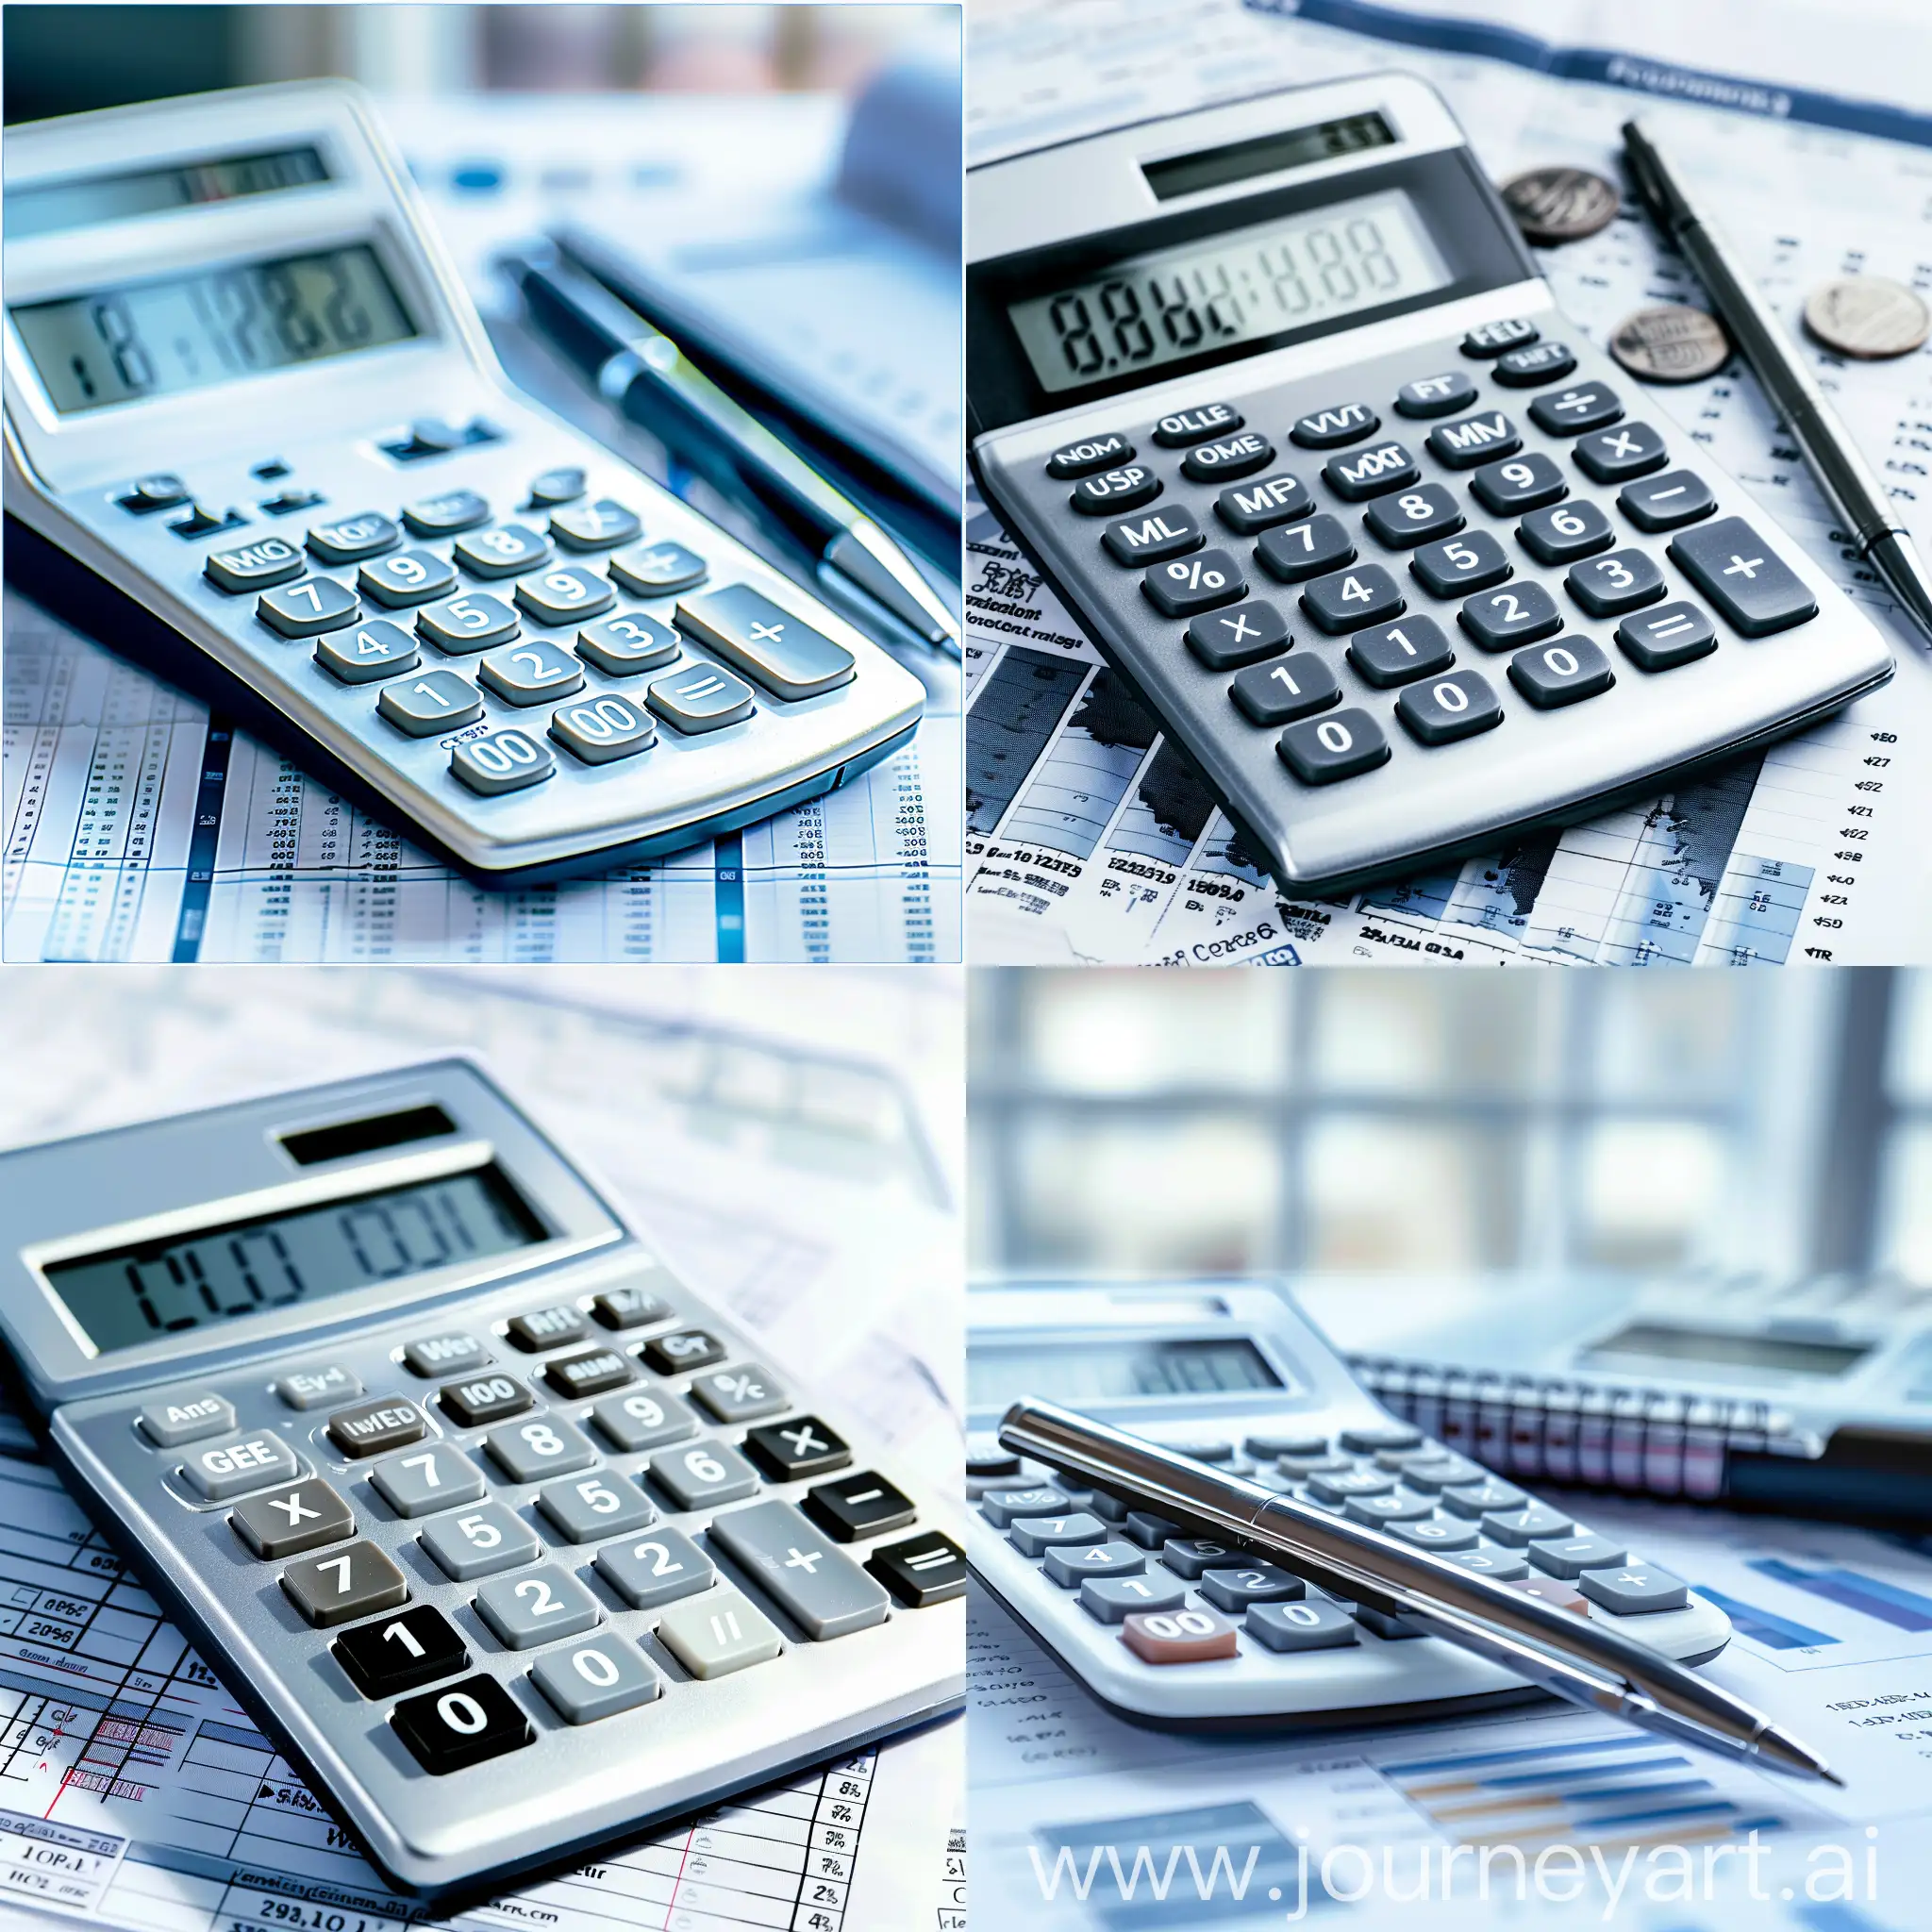 Professional-Accounting-Services-Calculator-on-Website